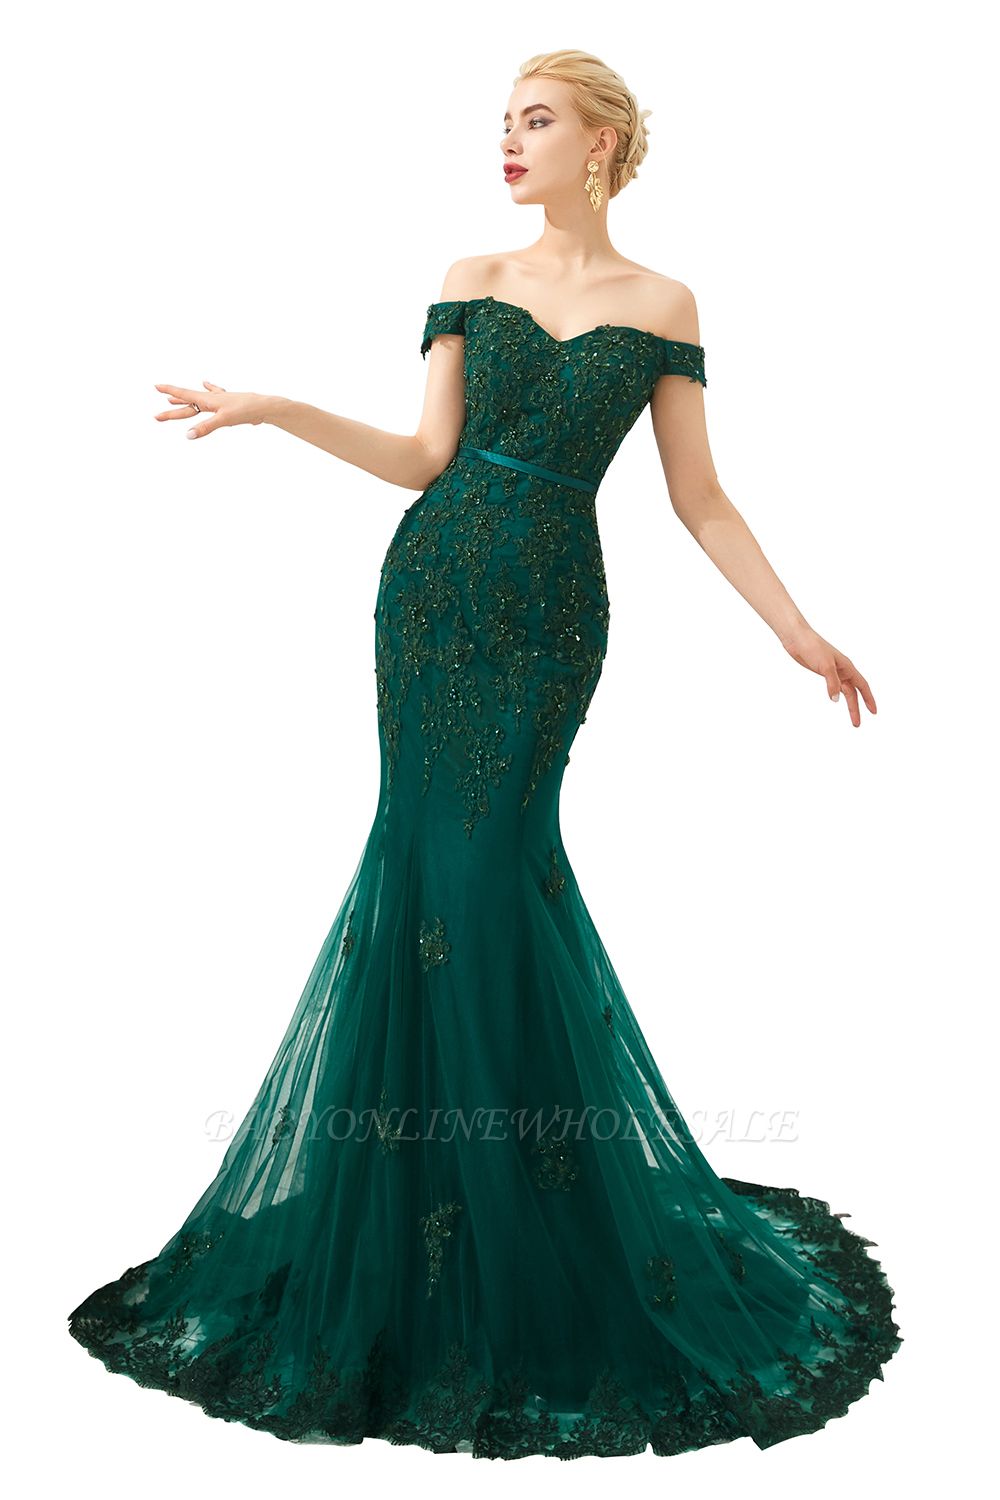 Harvey | Emerald green Mermaid Tulle Prom dress with Beaded Lace Appliques